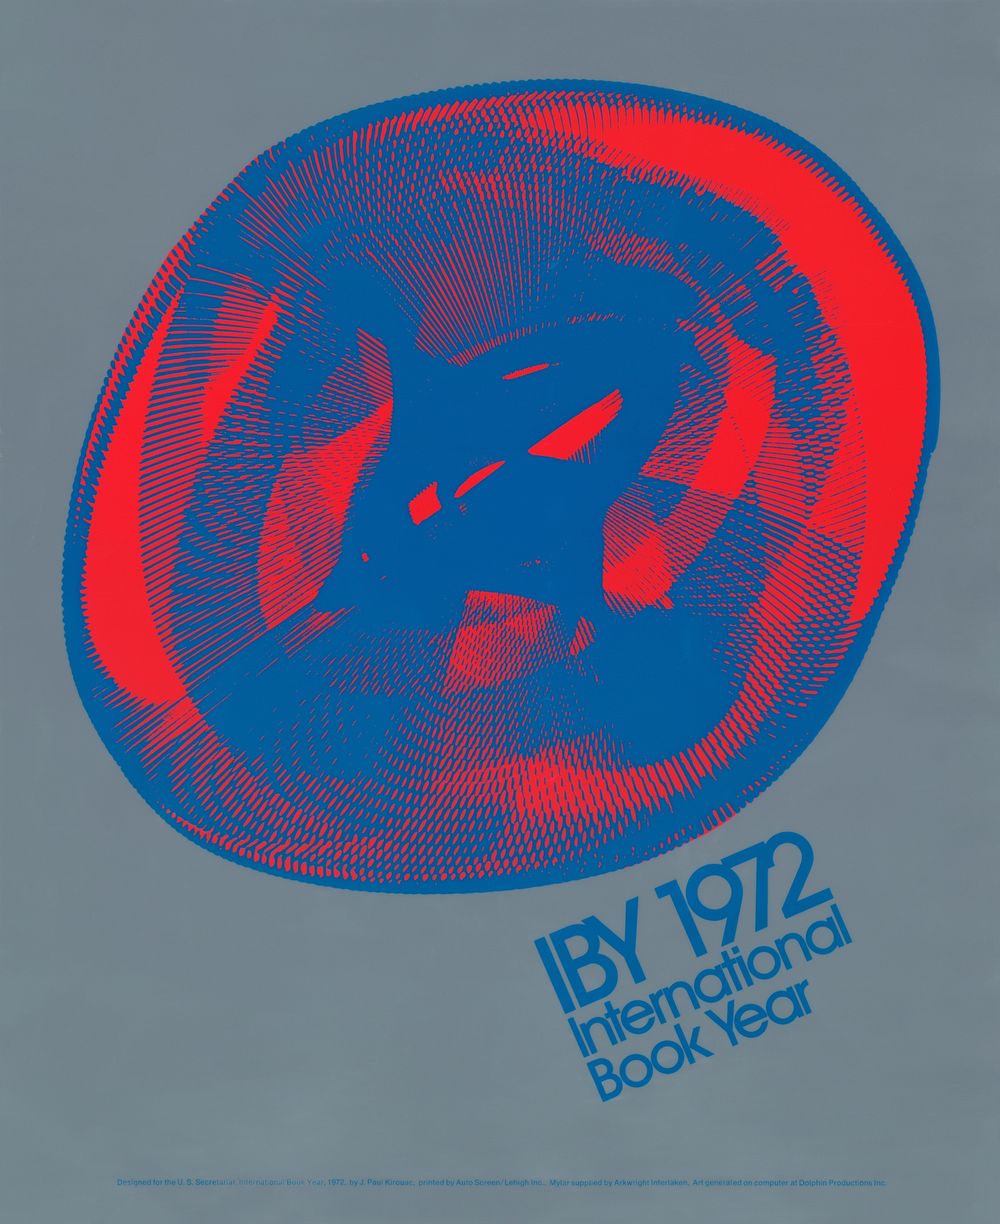 IBY 1972 : International book year (1972) vintage poster. Original public domain image from the Library of Congress.…